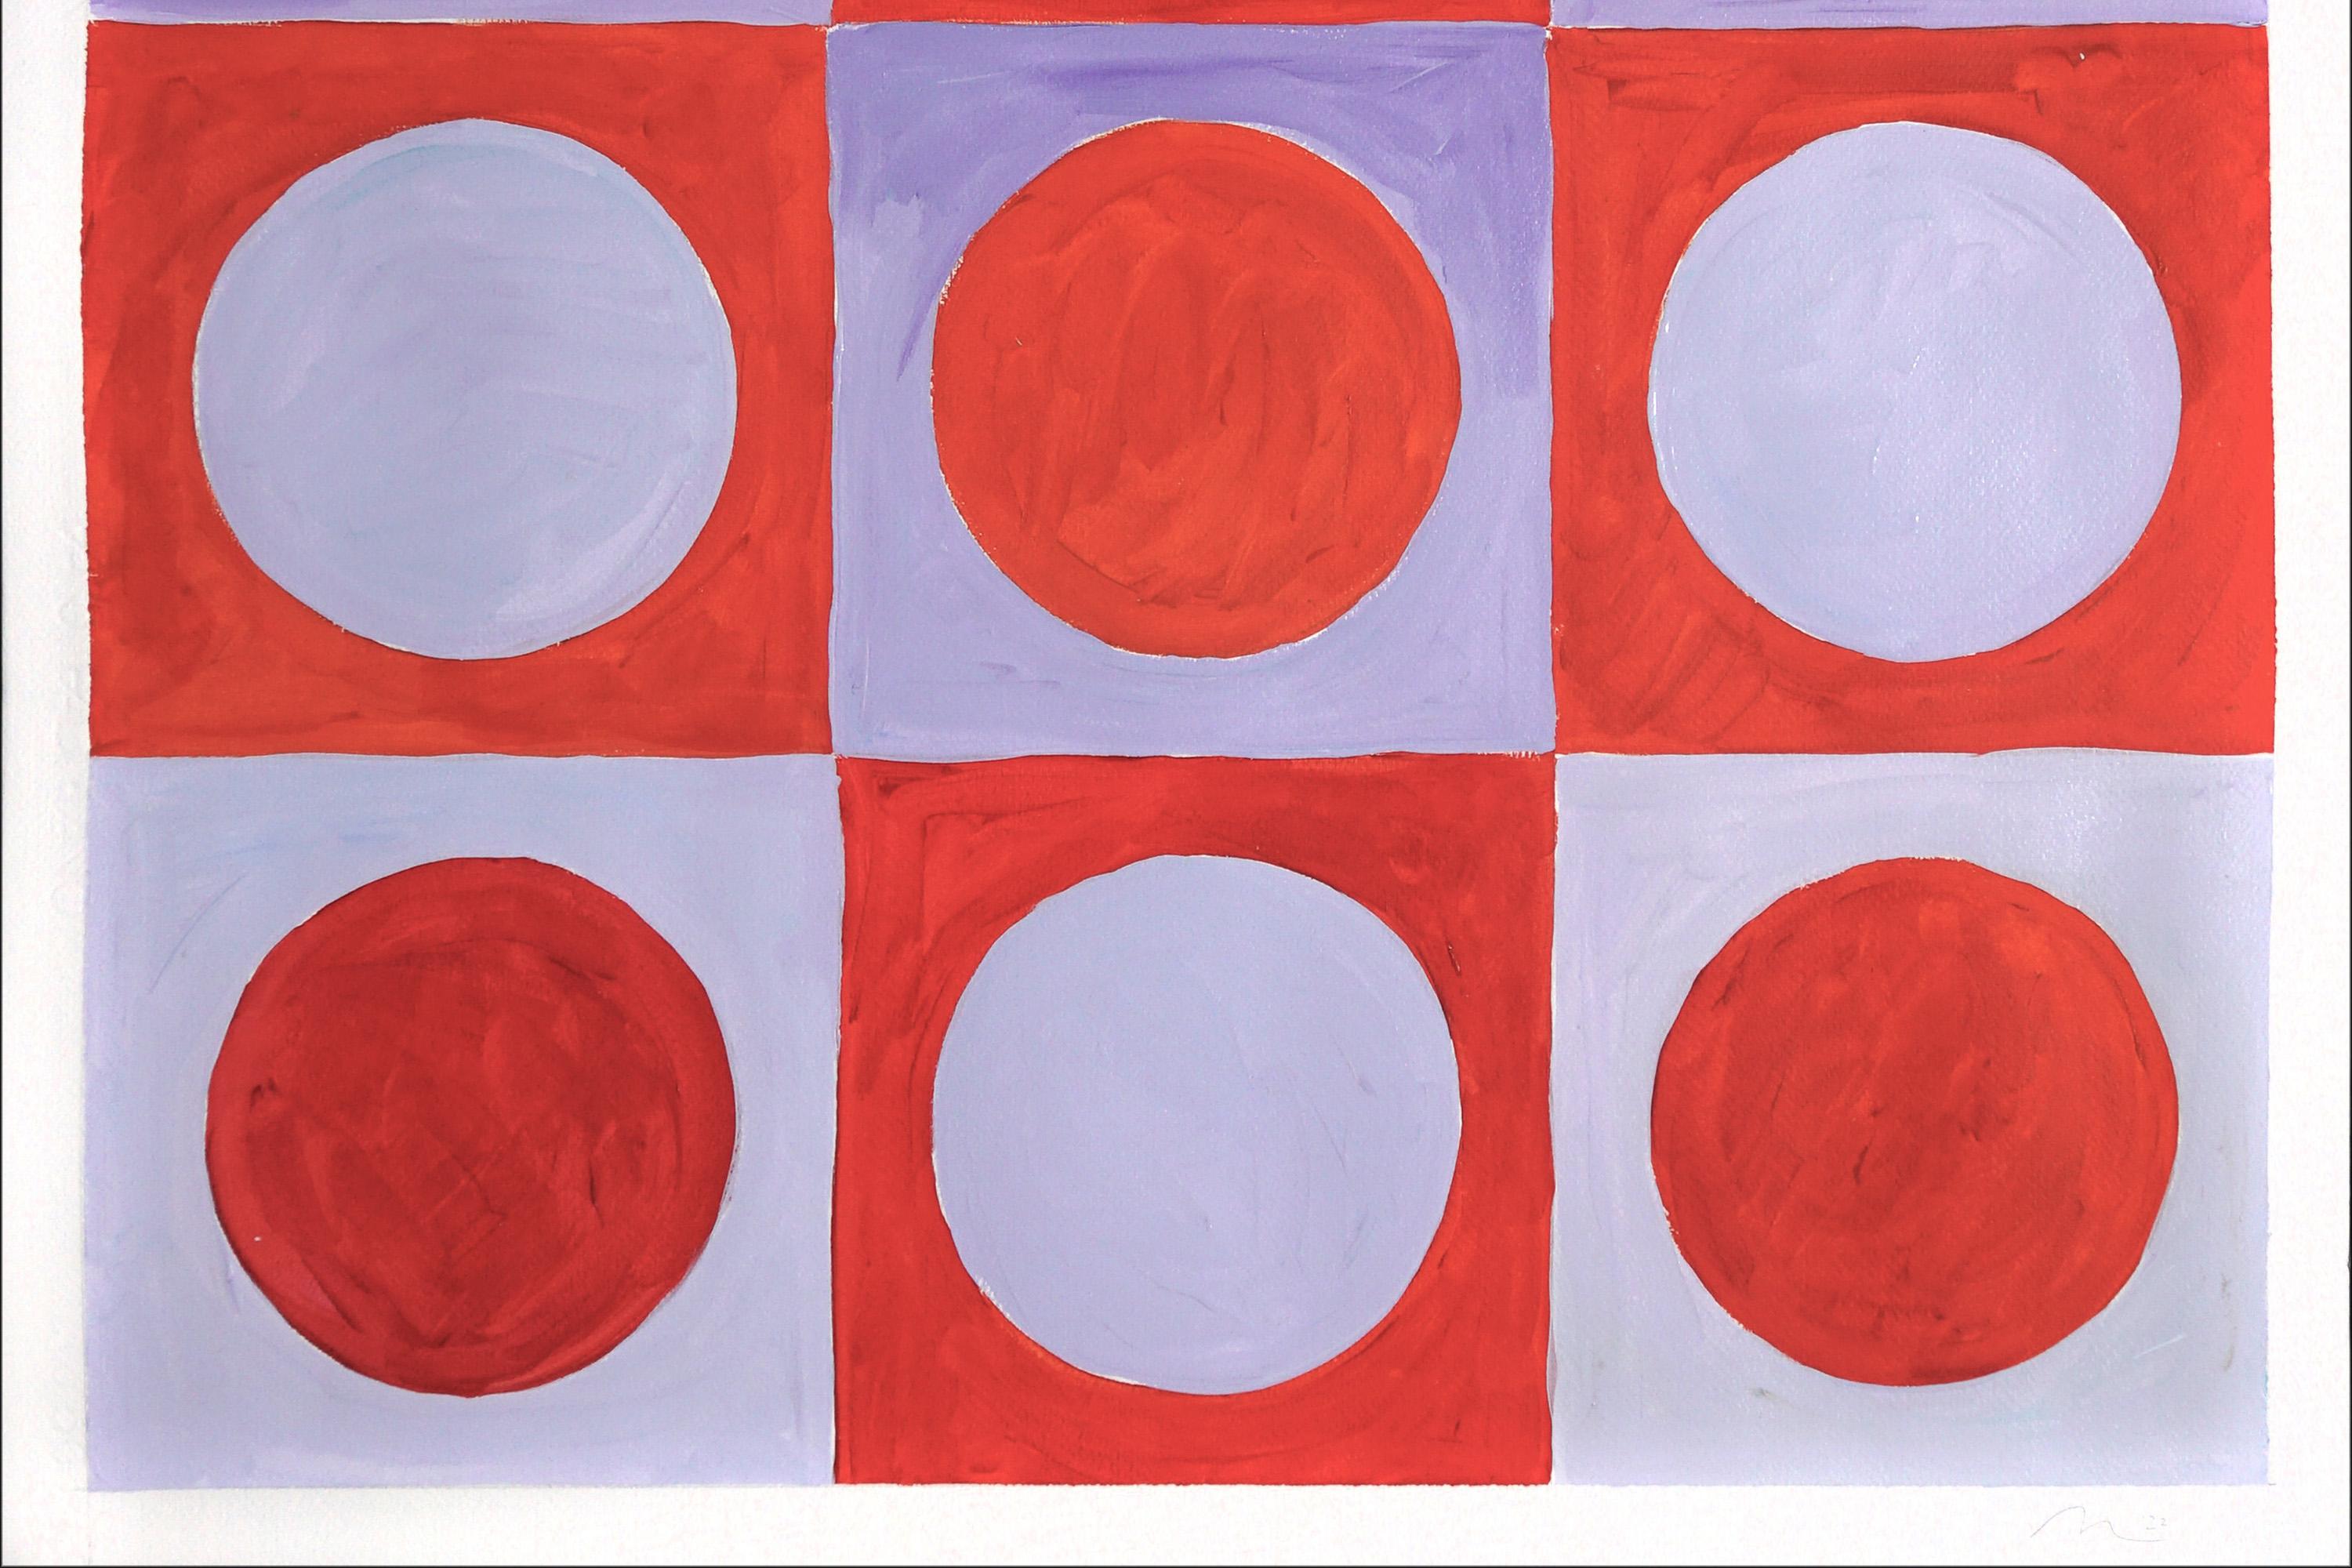 Royal Violet Checkers, Red Ruby Circles and Squares, Bauhaus Tile Pattern, Paper - Purple Abstract Painting by Natalia Roman